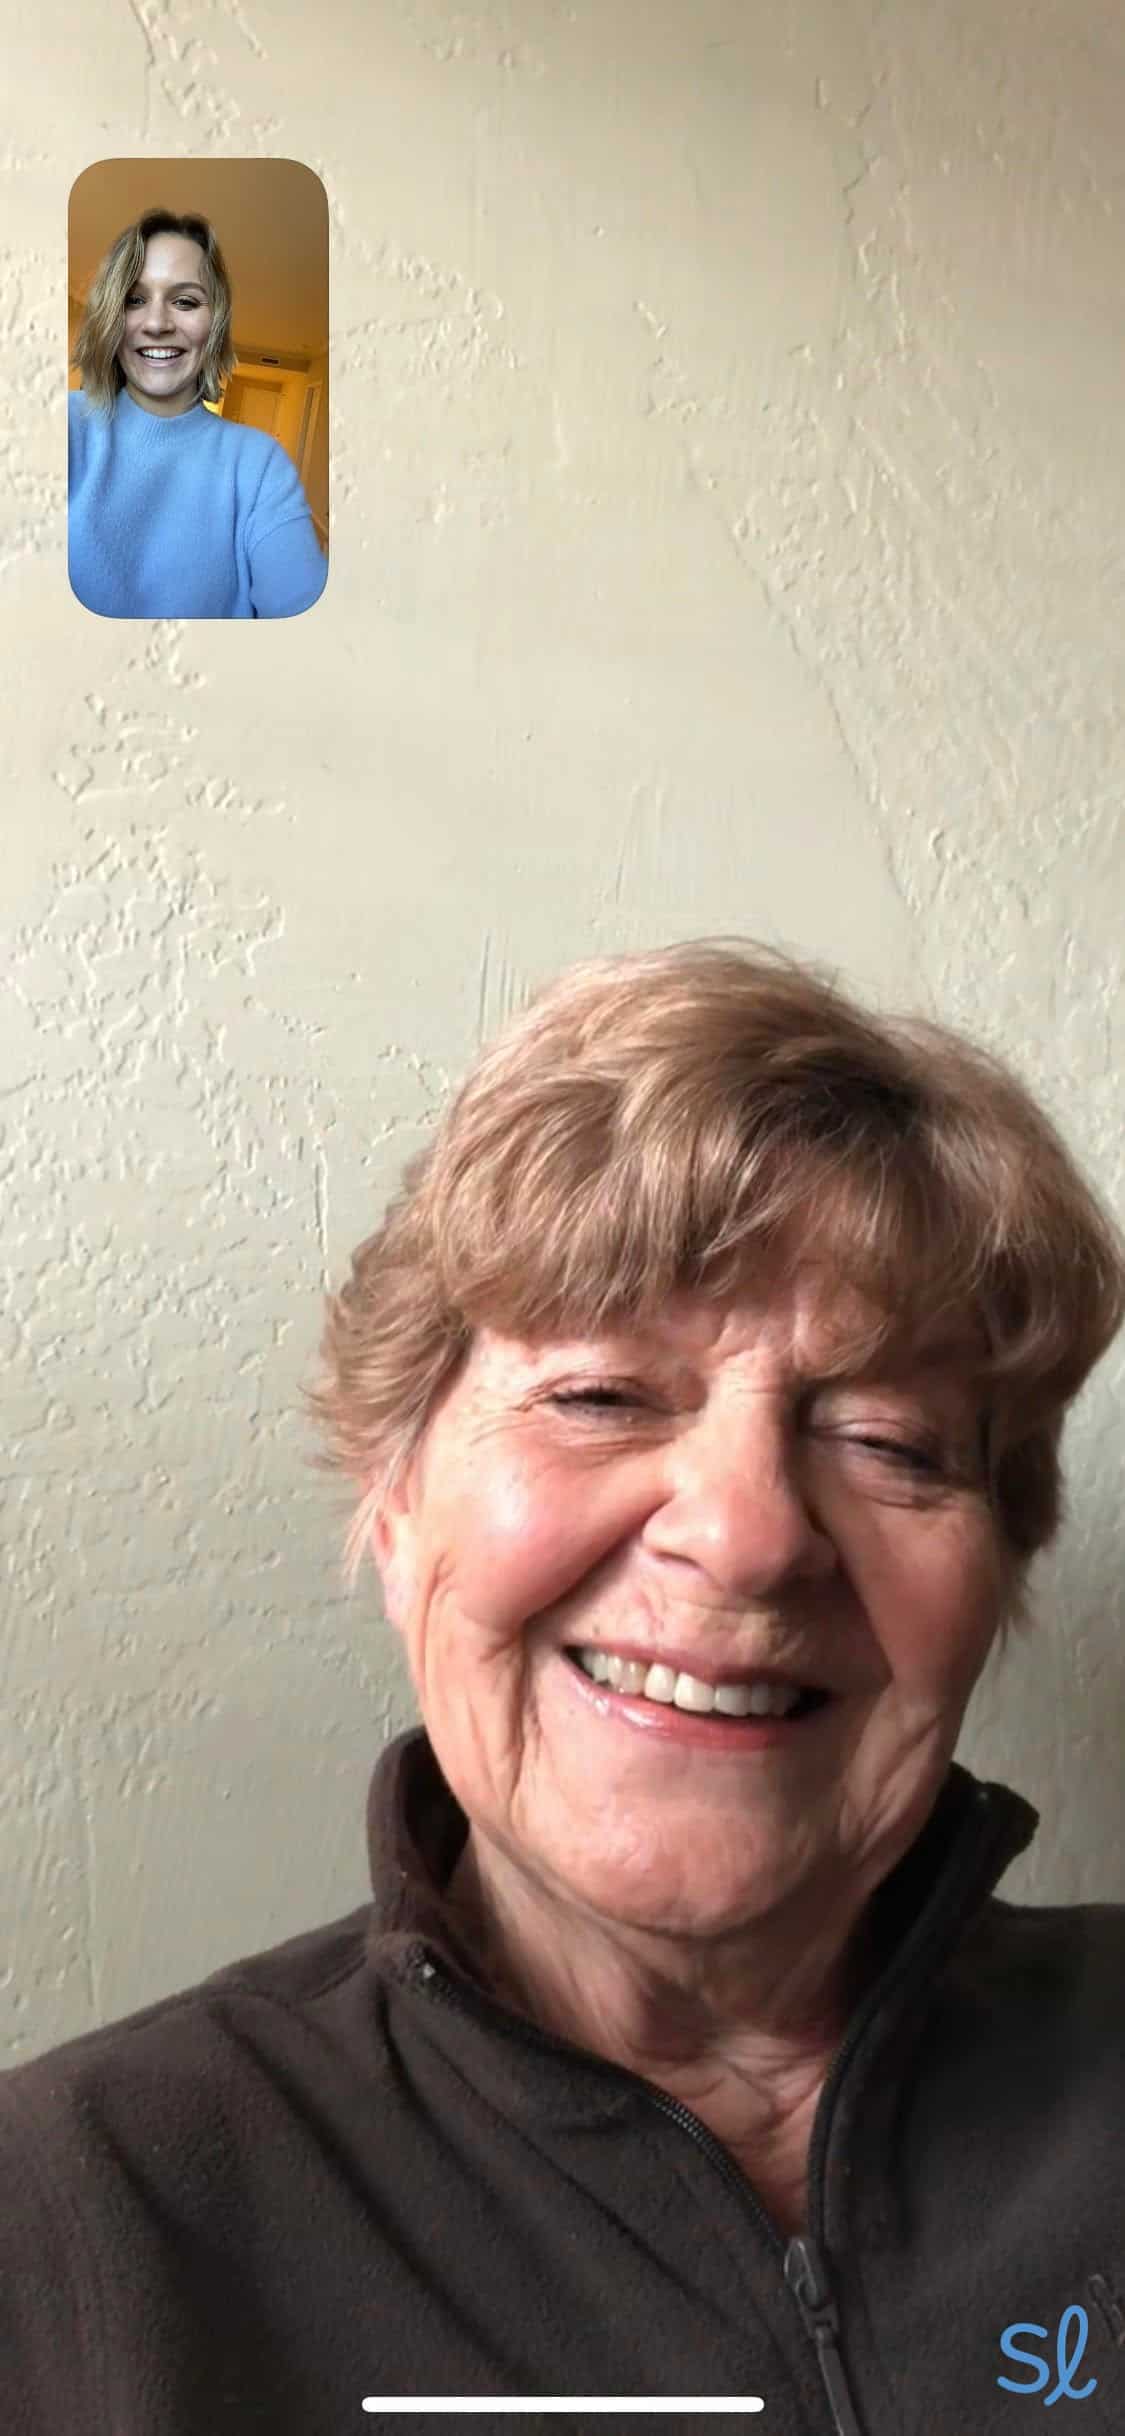 FaceTiming with my grandma on our iPhones